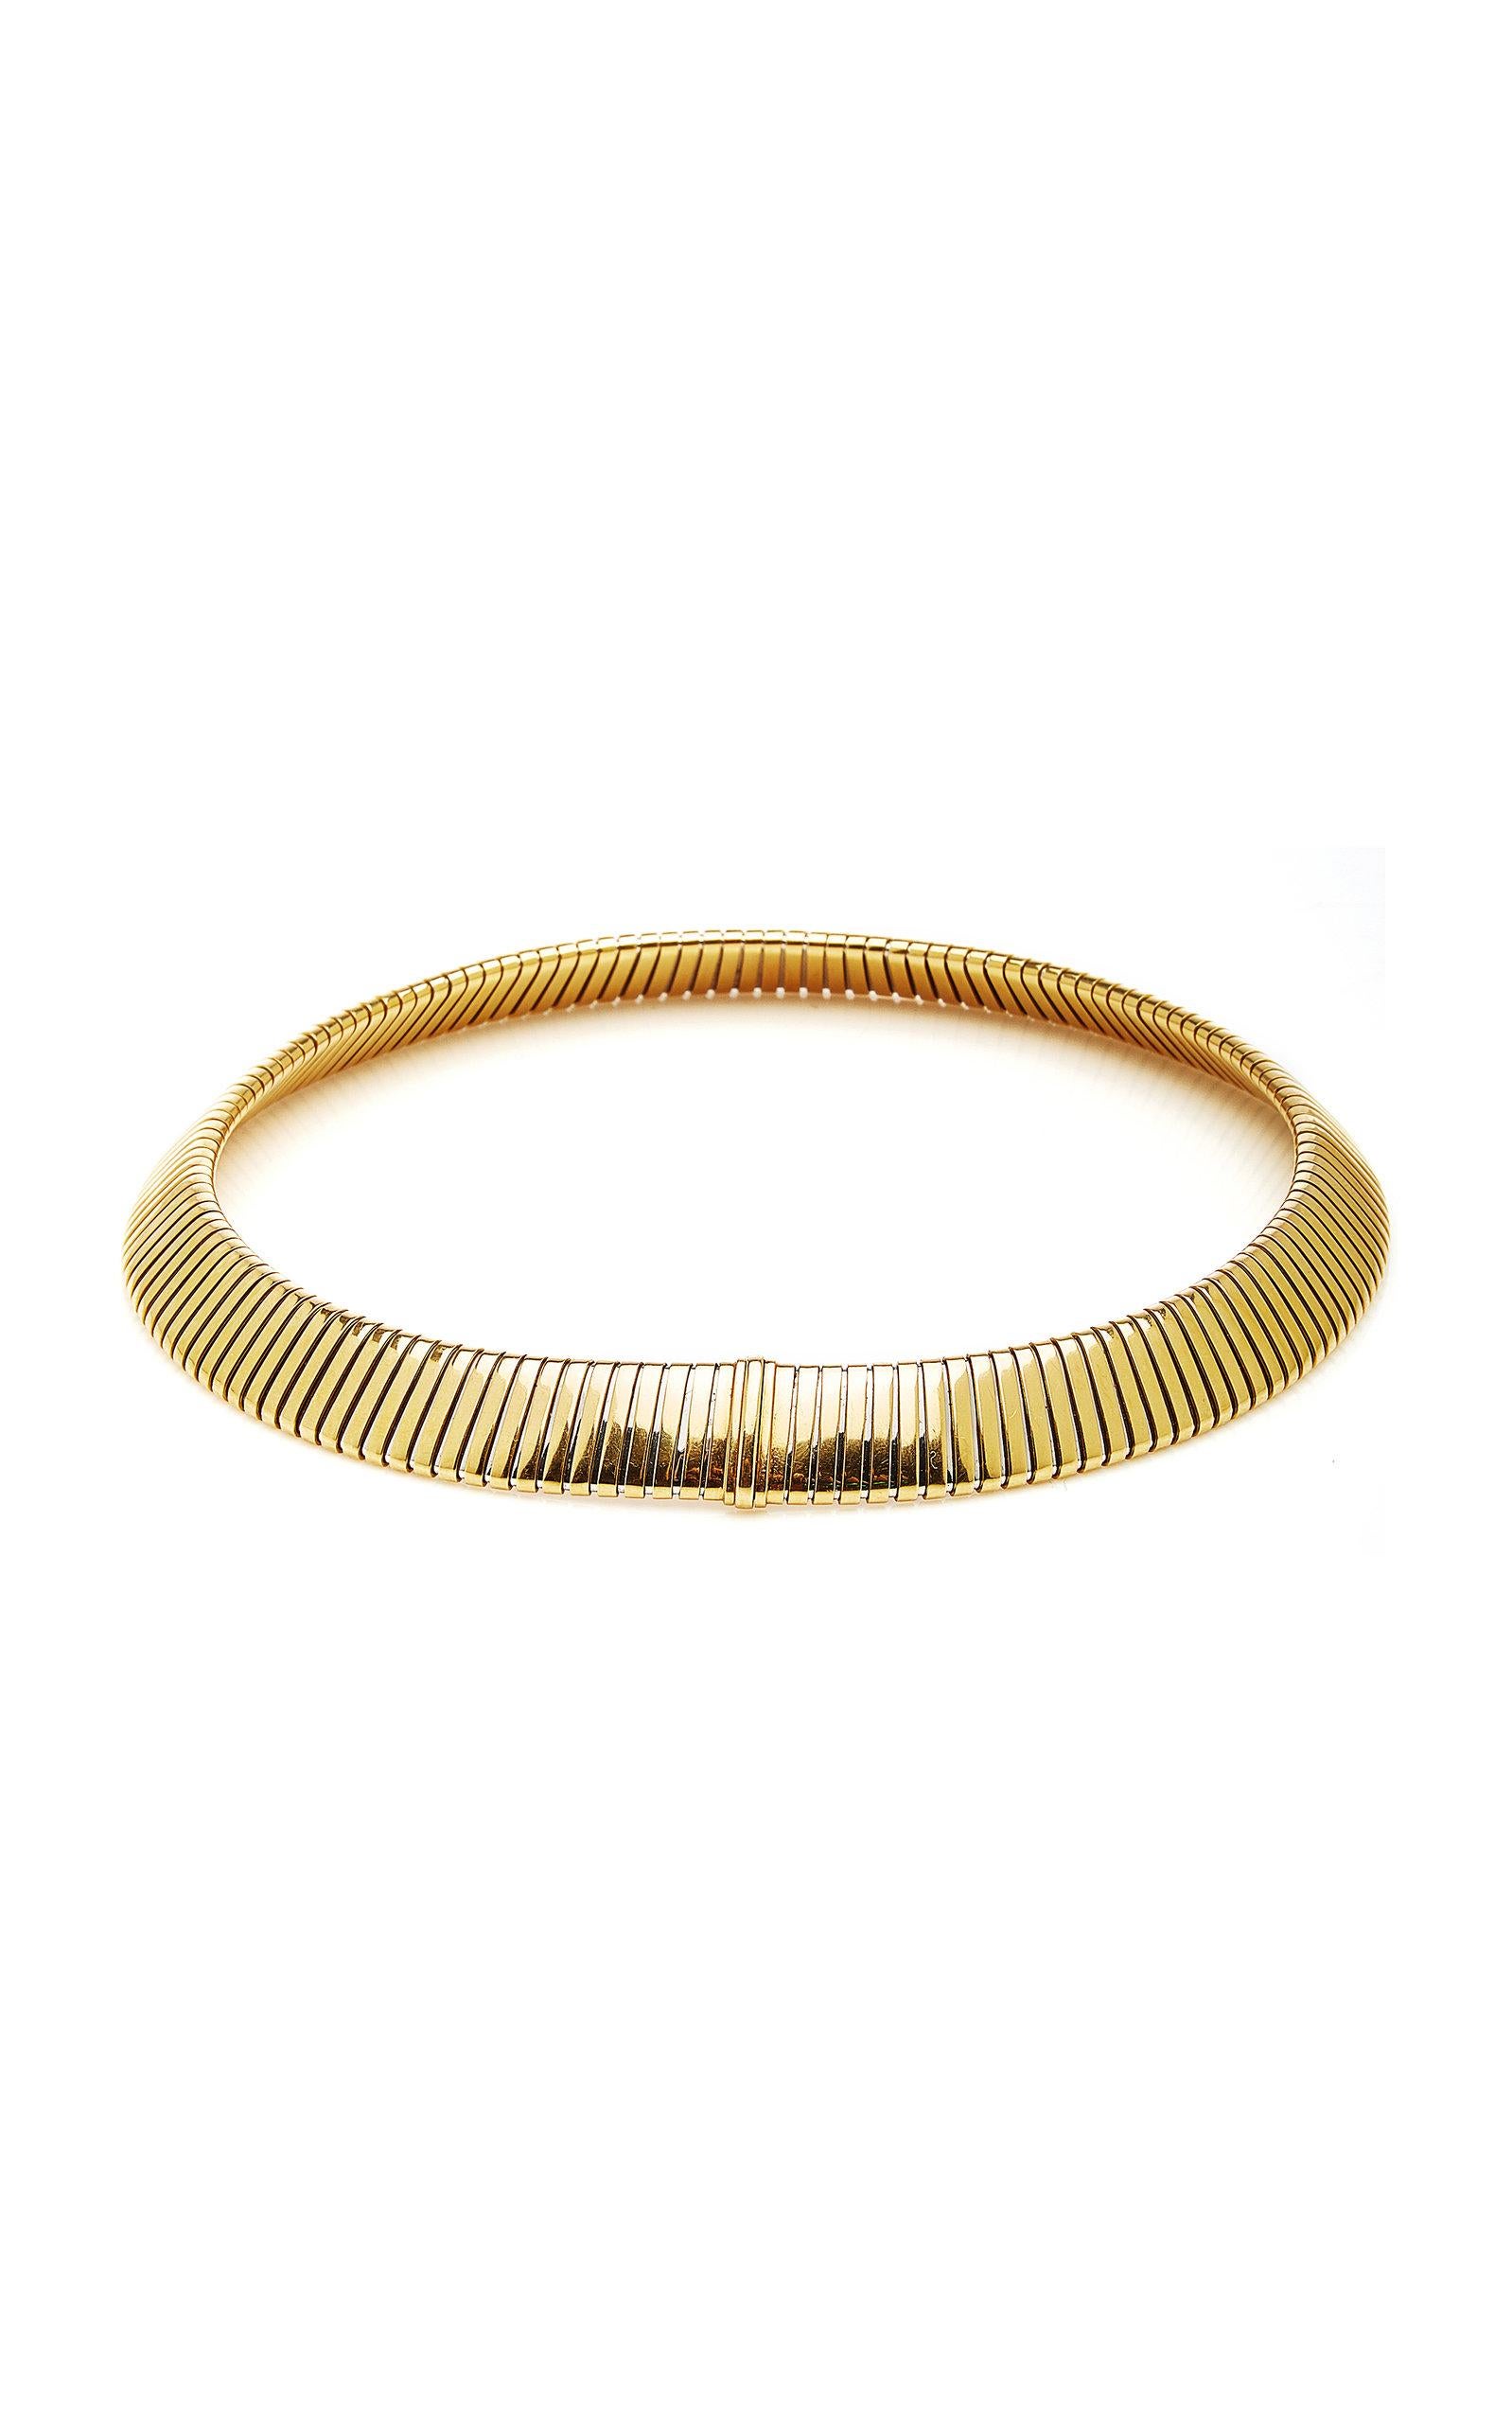 An Iconic Bulgari Tubogas necklace in 18kt yellow gold. Made in Italy, circa 1970s.